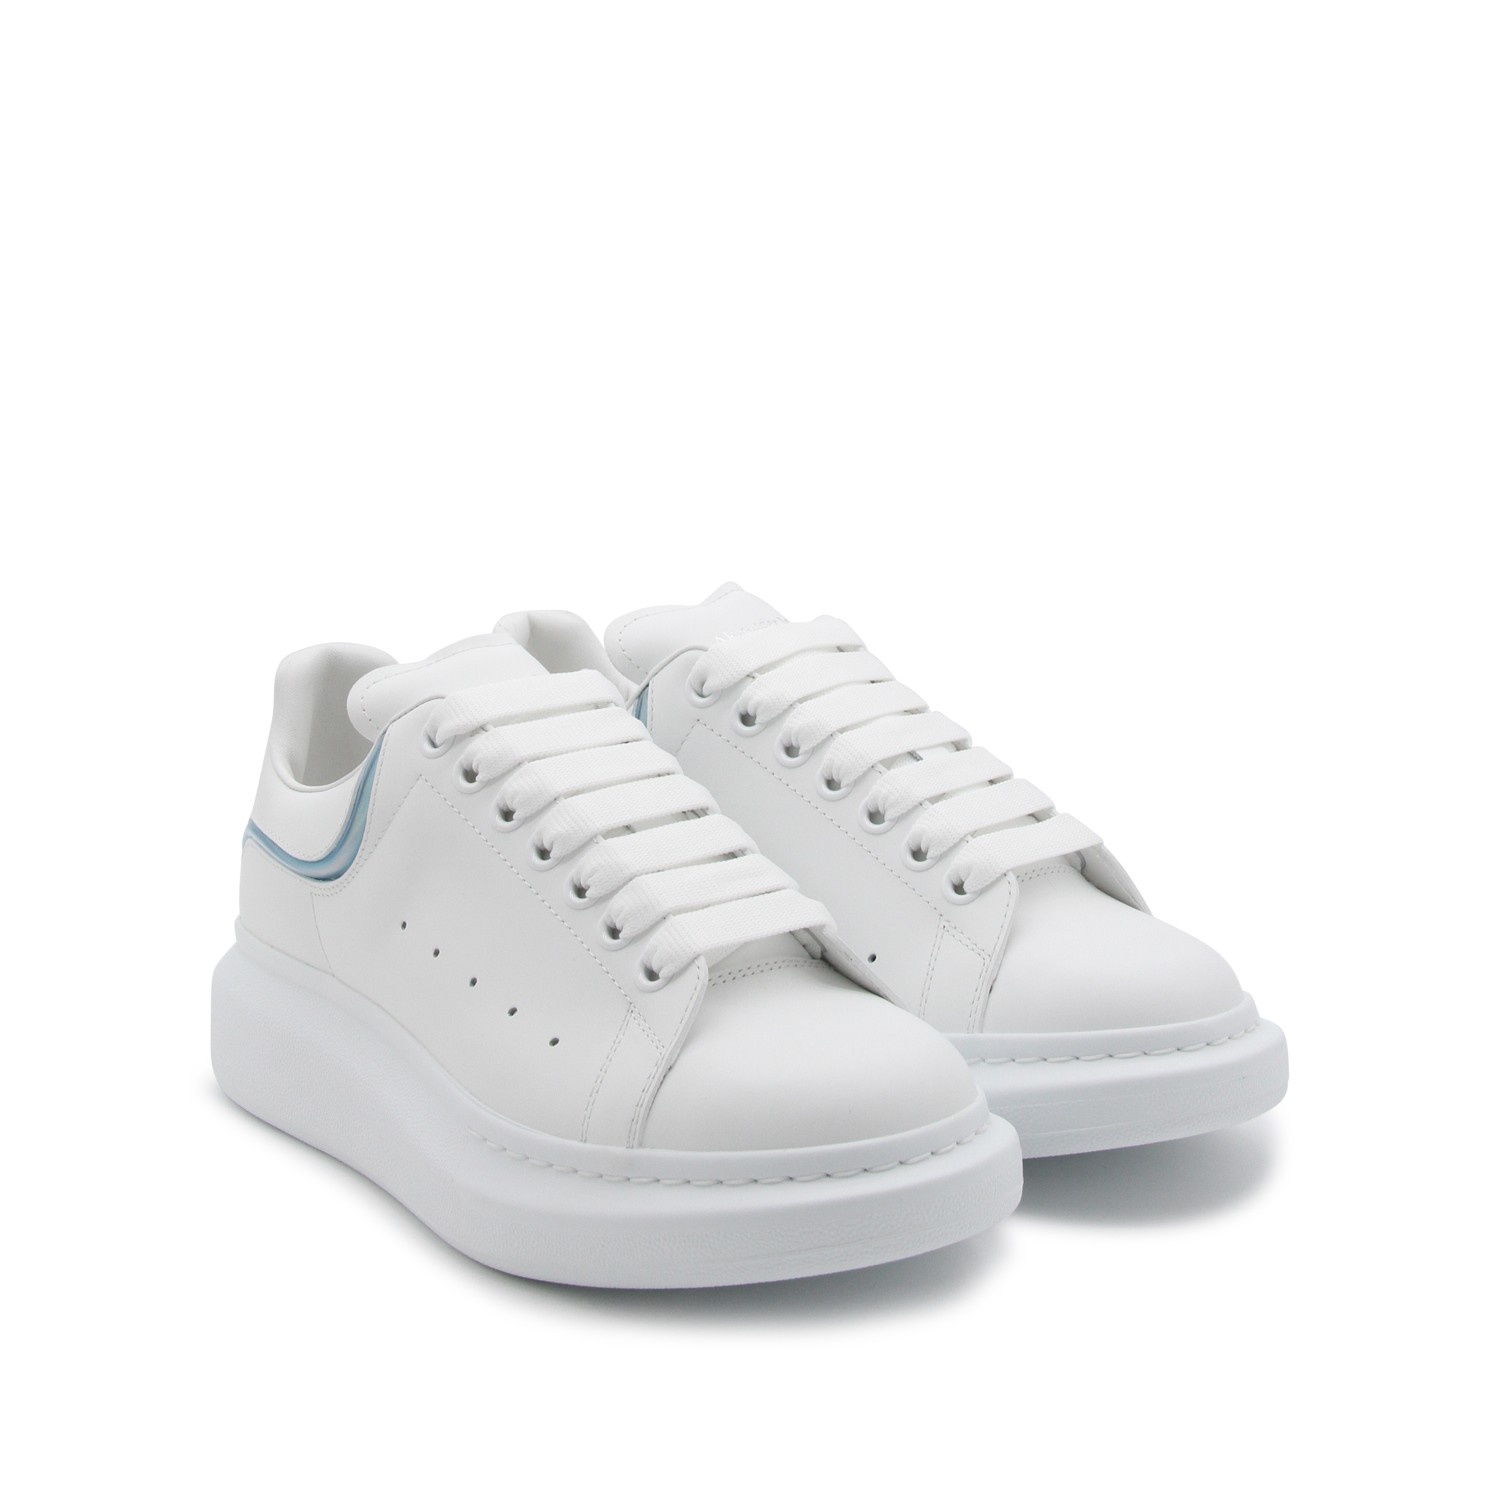 WHITE MULTICOLOUR LEATHER OVERSIZED SNEAKERS - 2